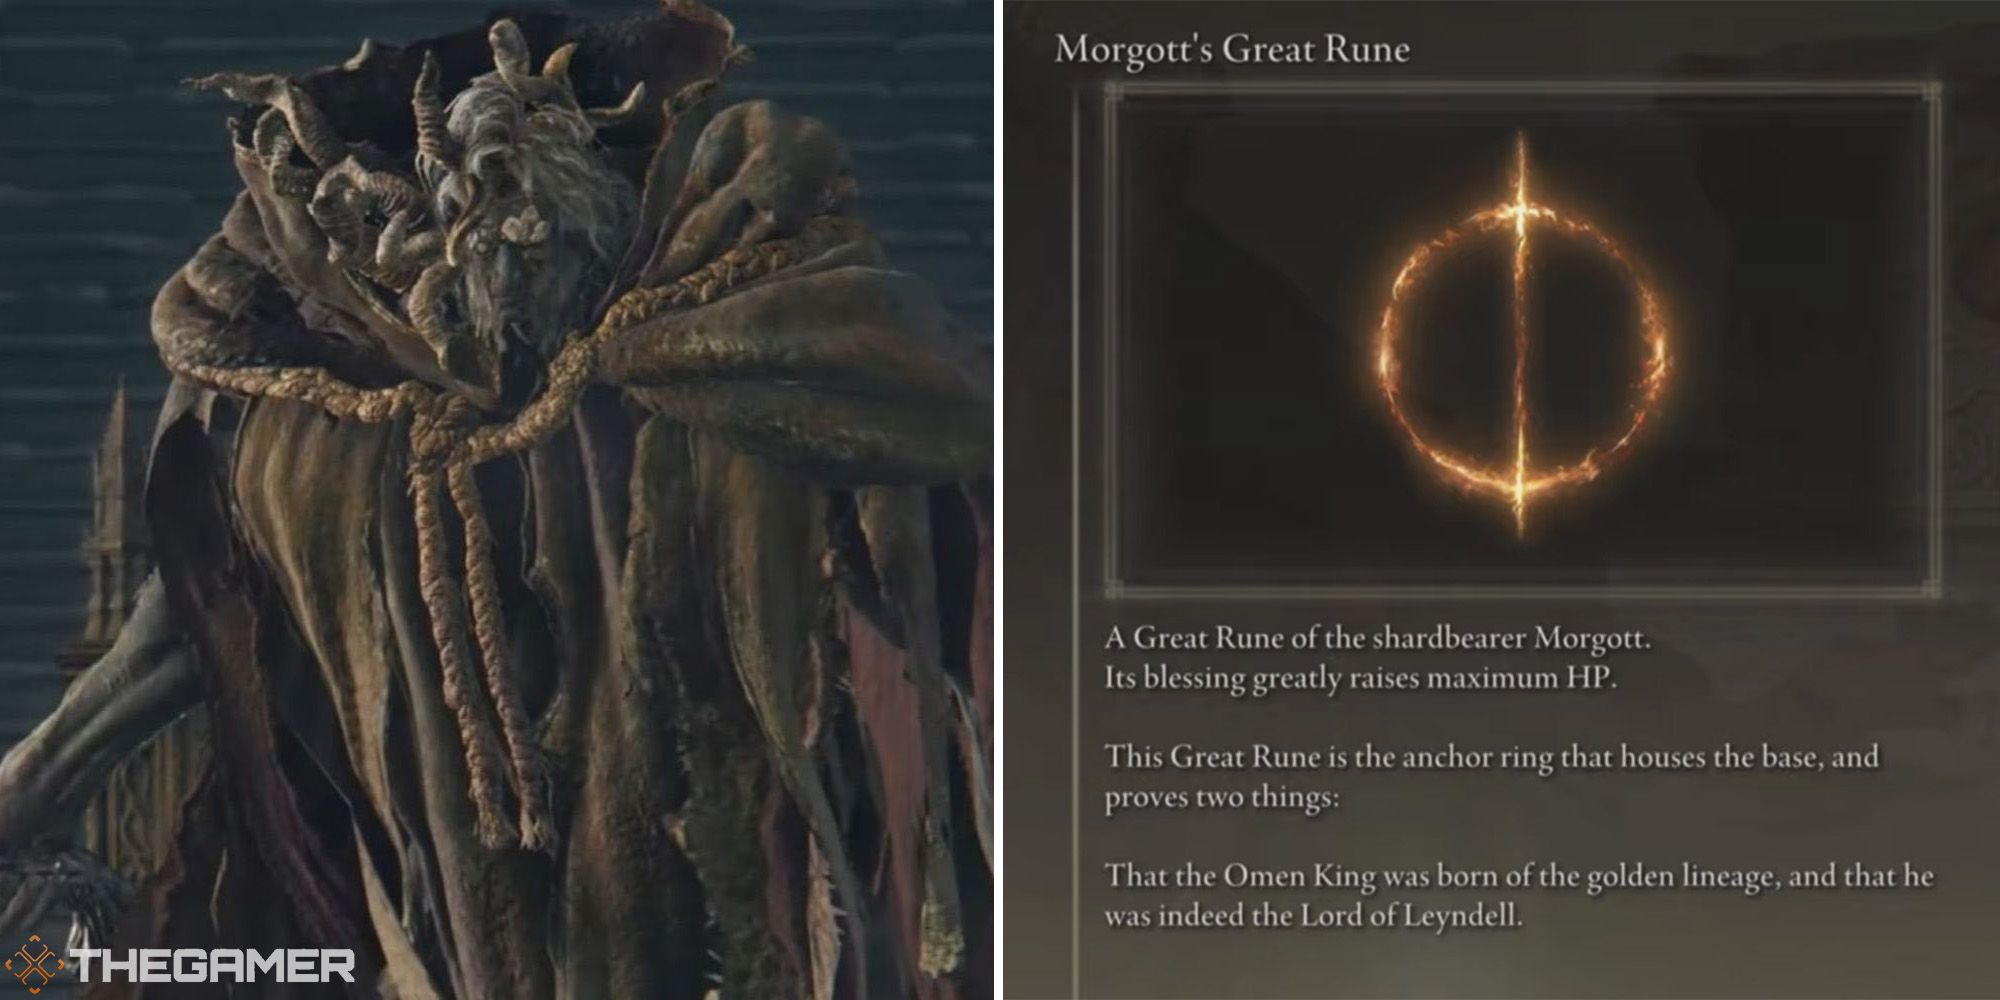 Elden Ring Reveals New Great Rune: Morgott – What Could It Mean for the Highly Anticipated Game?